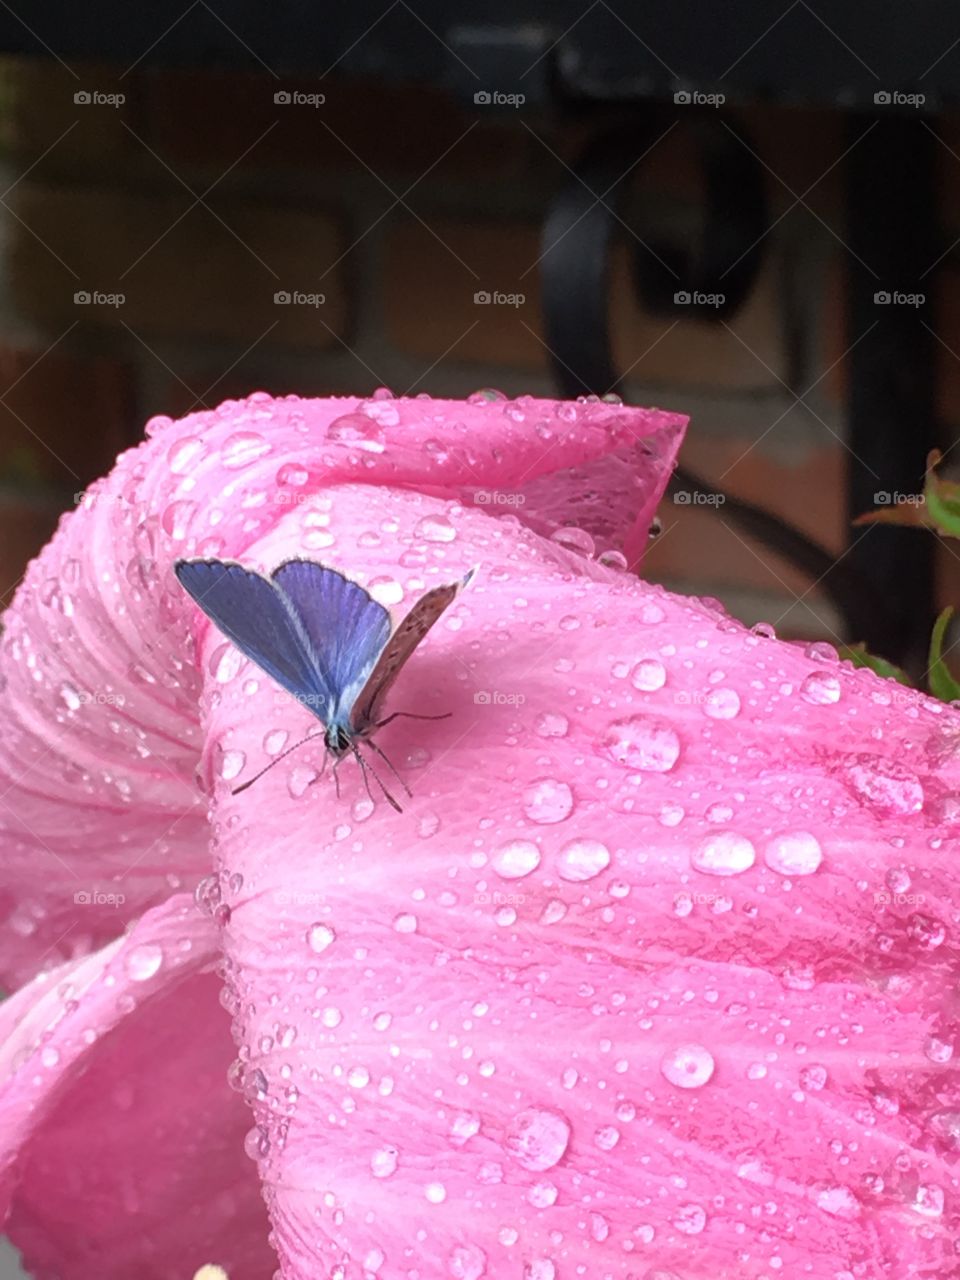 A butterfly peacefully drinking on a flower petal